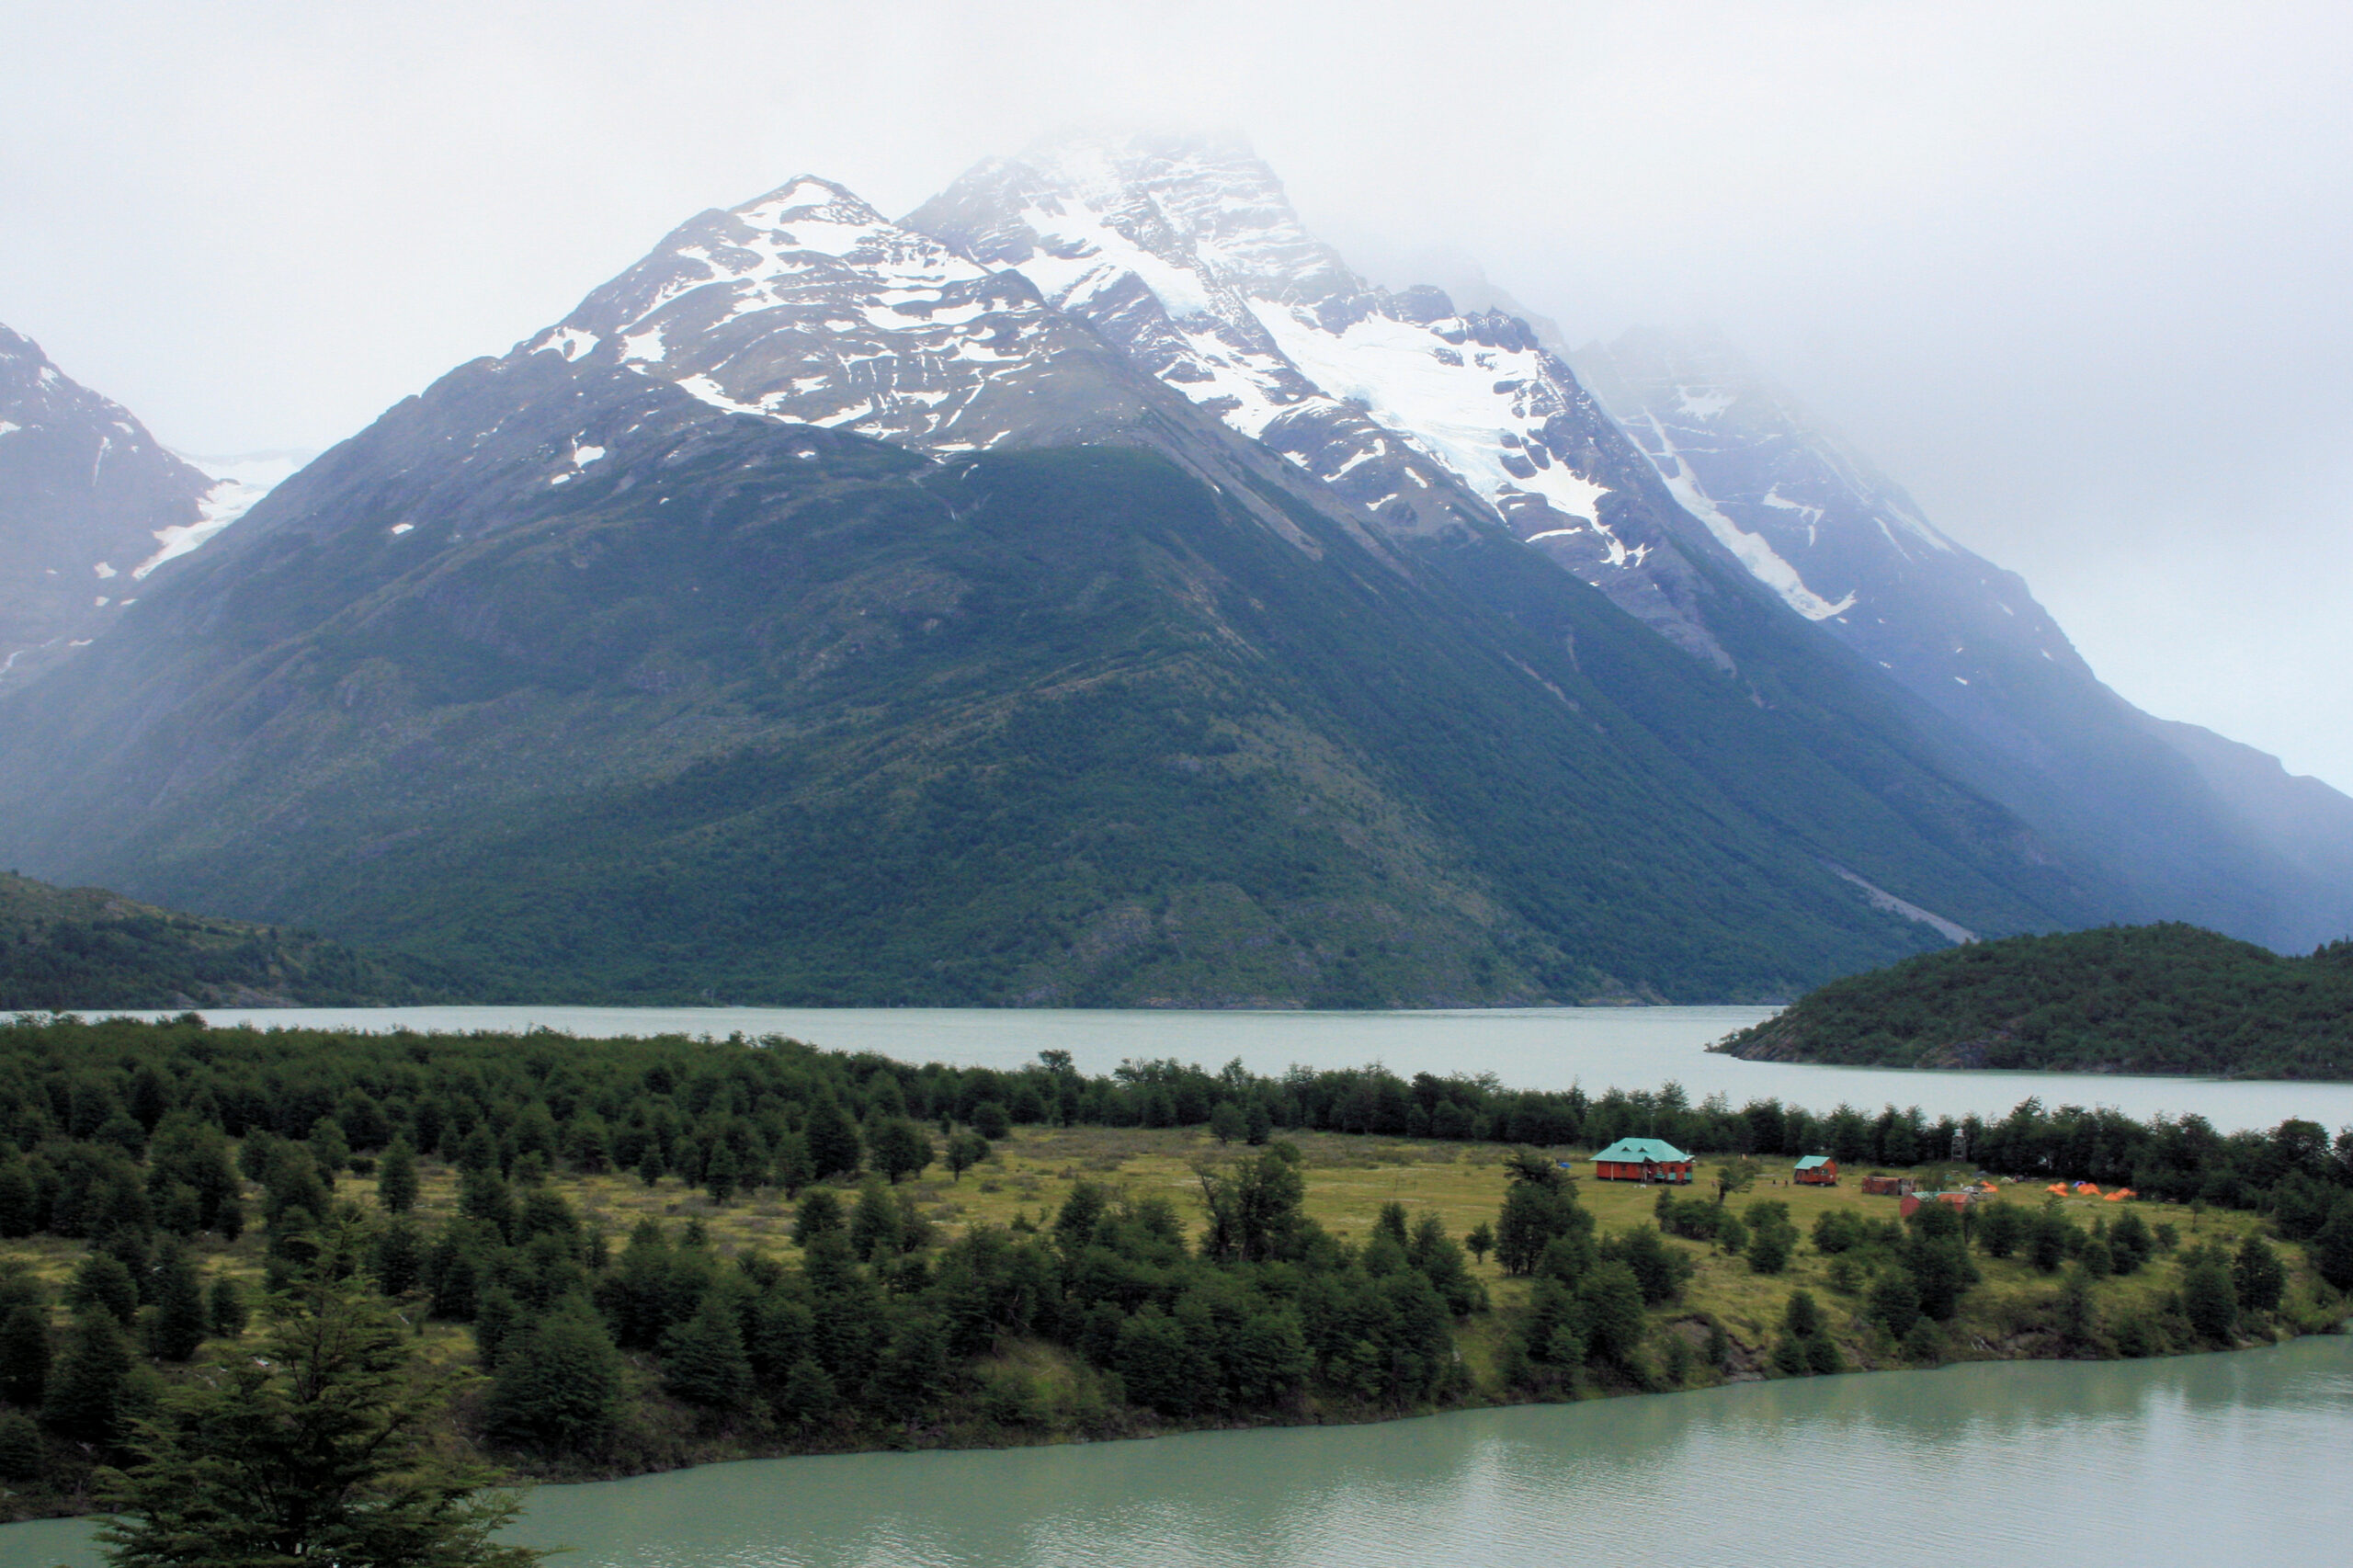 Mountains shrouded in fog behind Refugio Lago Paine in Chilean Patagonia's Torres del Paine National Park.